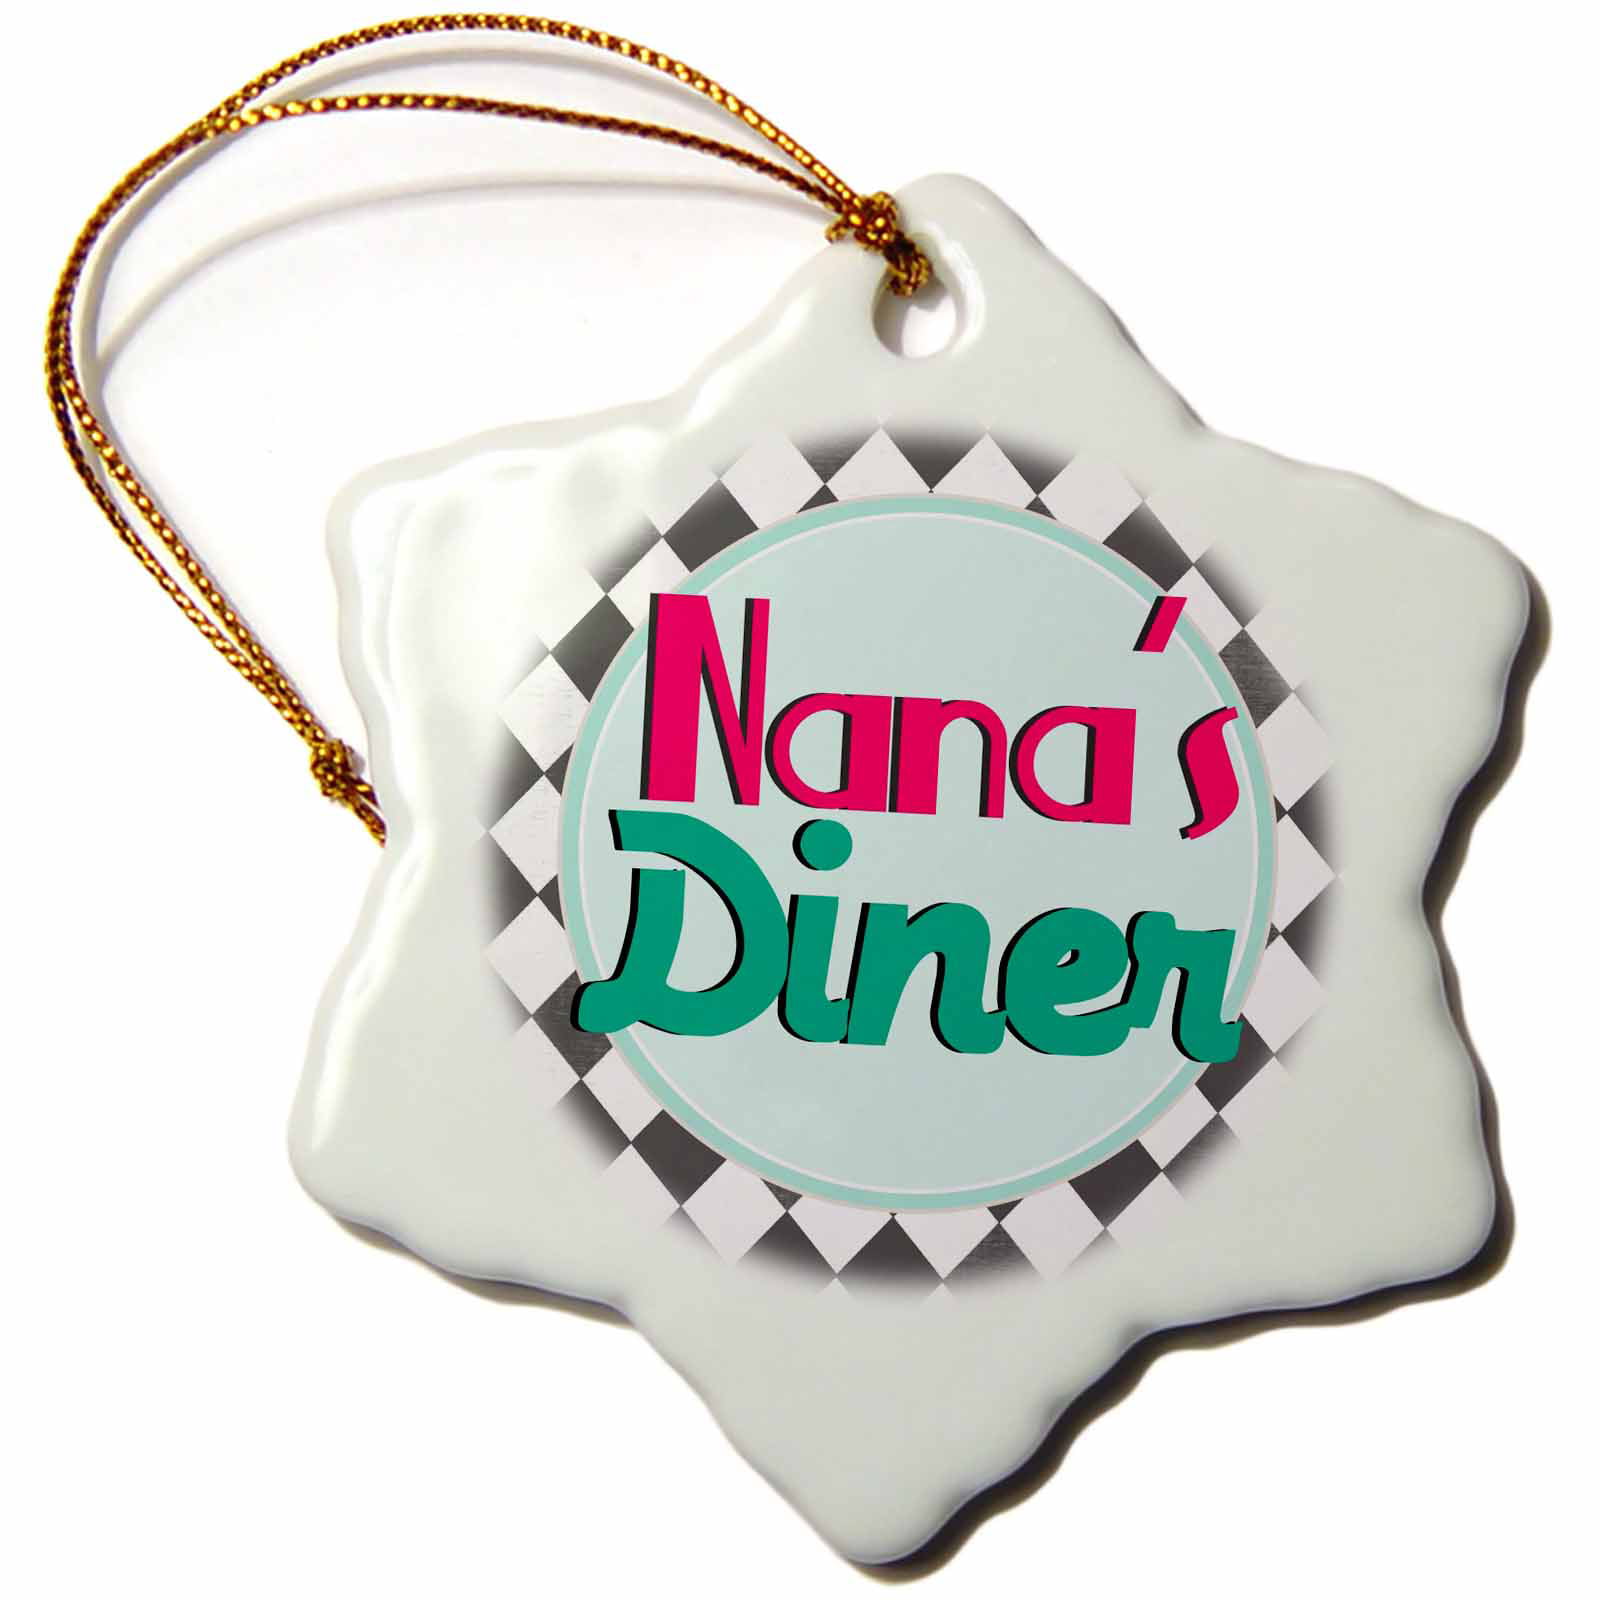 3dRose Nanas Diner sign on black - Retro hot pink turquoise teal blue 1950s 50s fifties Grandmas kitchen - Snowflake Ornament, 3-inch